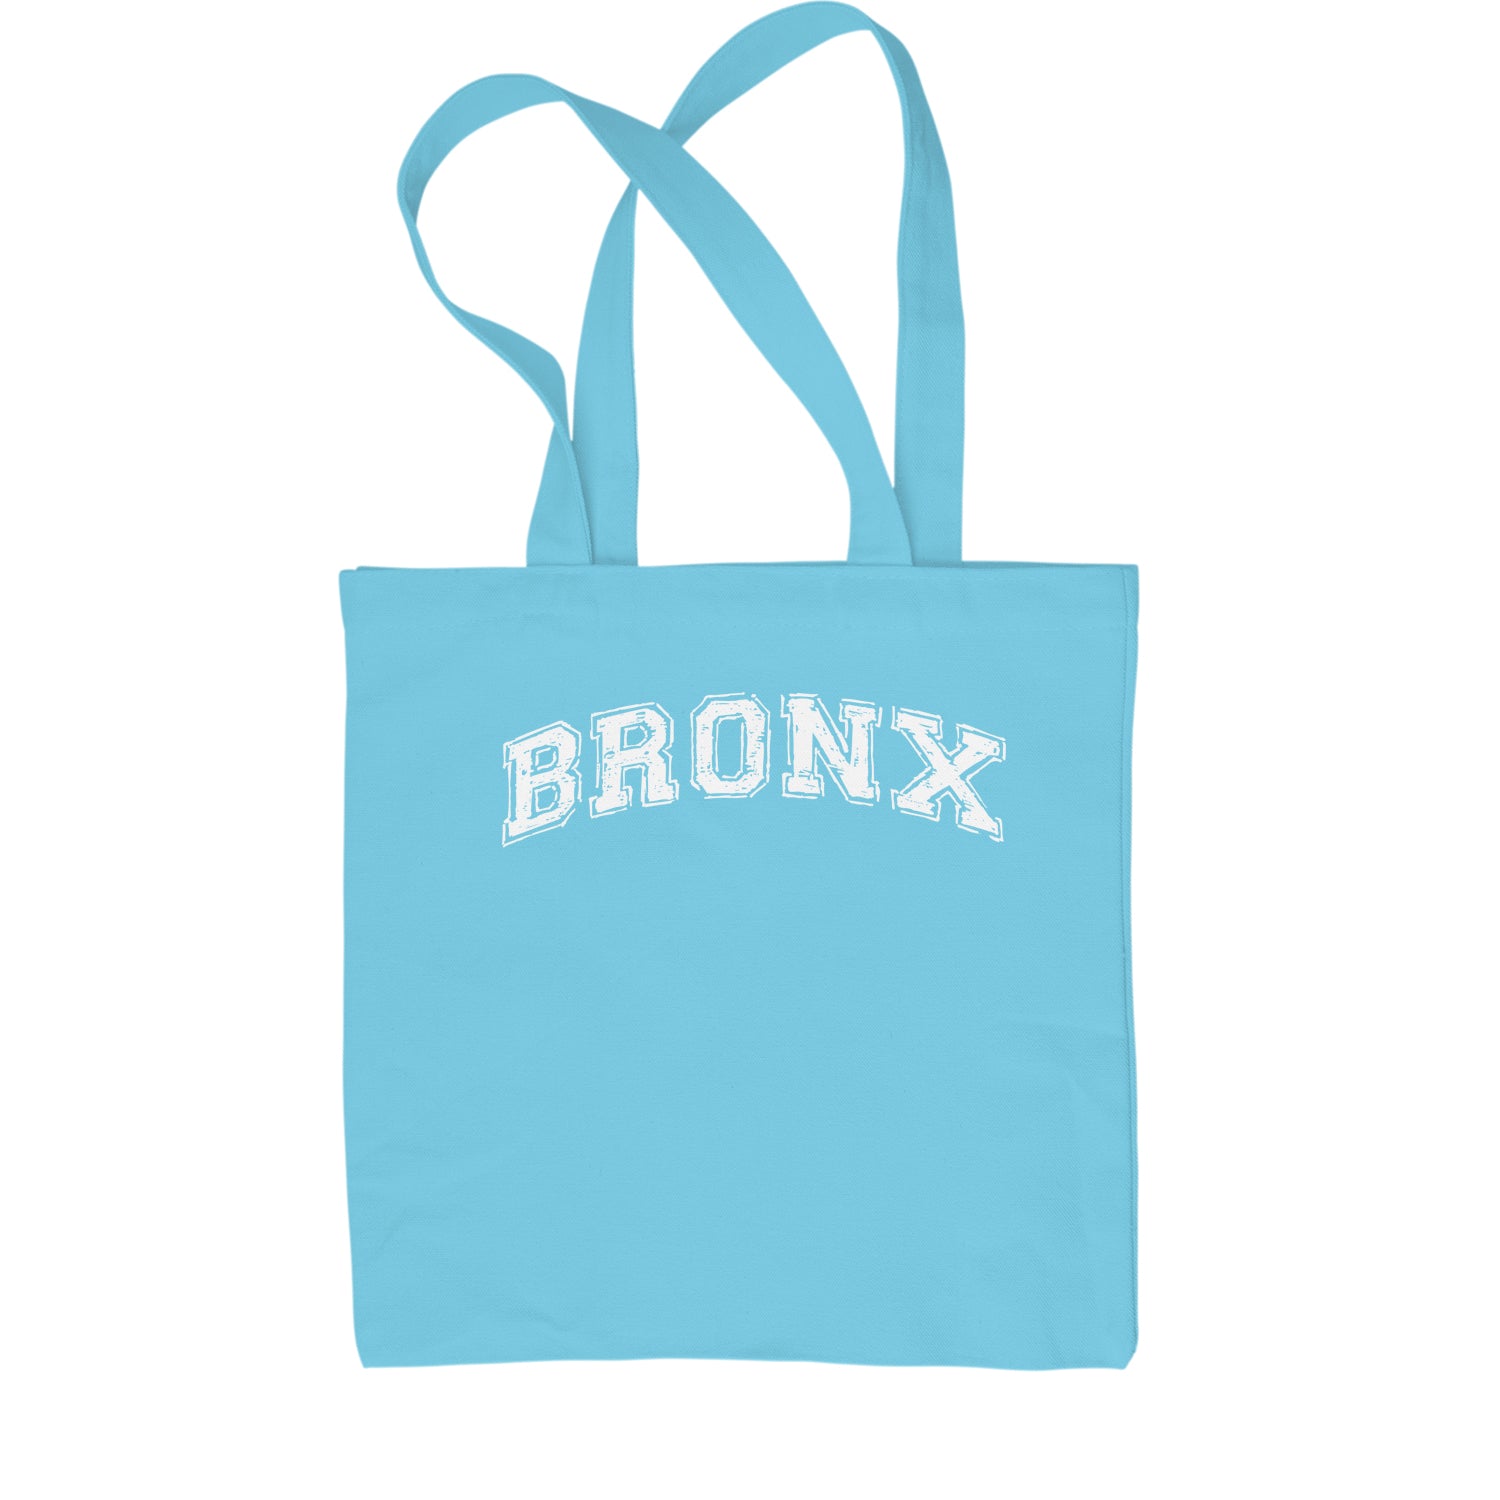 Bronx - From The Block Shopping Tote Bag b, cardi, concert, its, Jennifer, lopez, merch, my, party, tour by Expression Tees